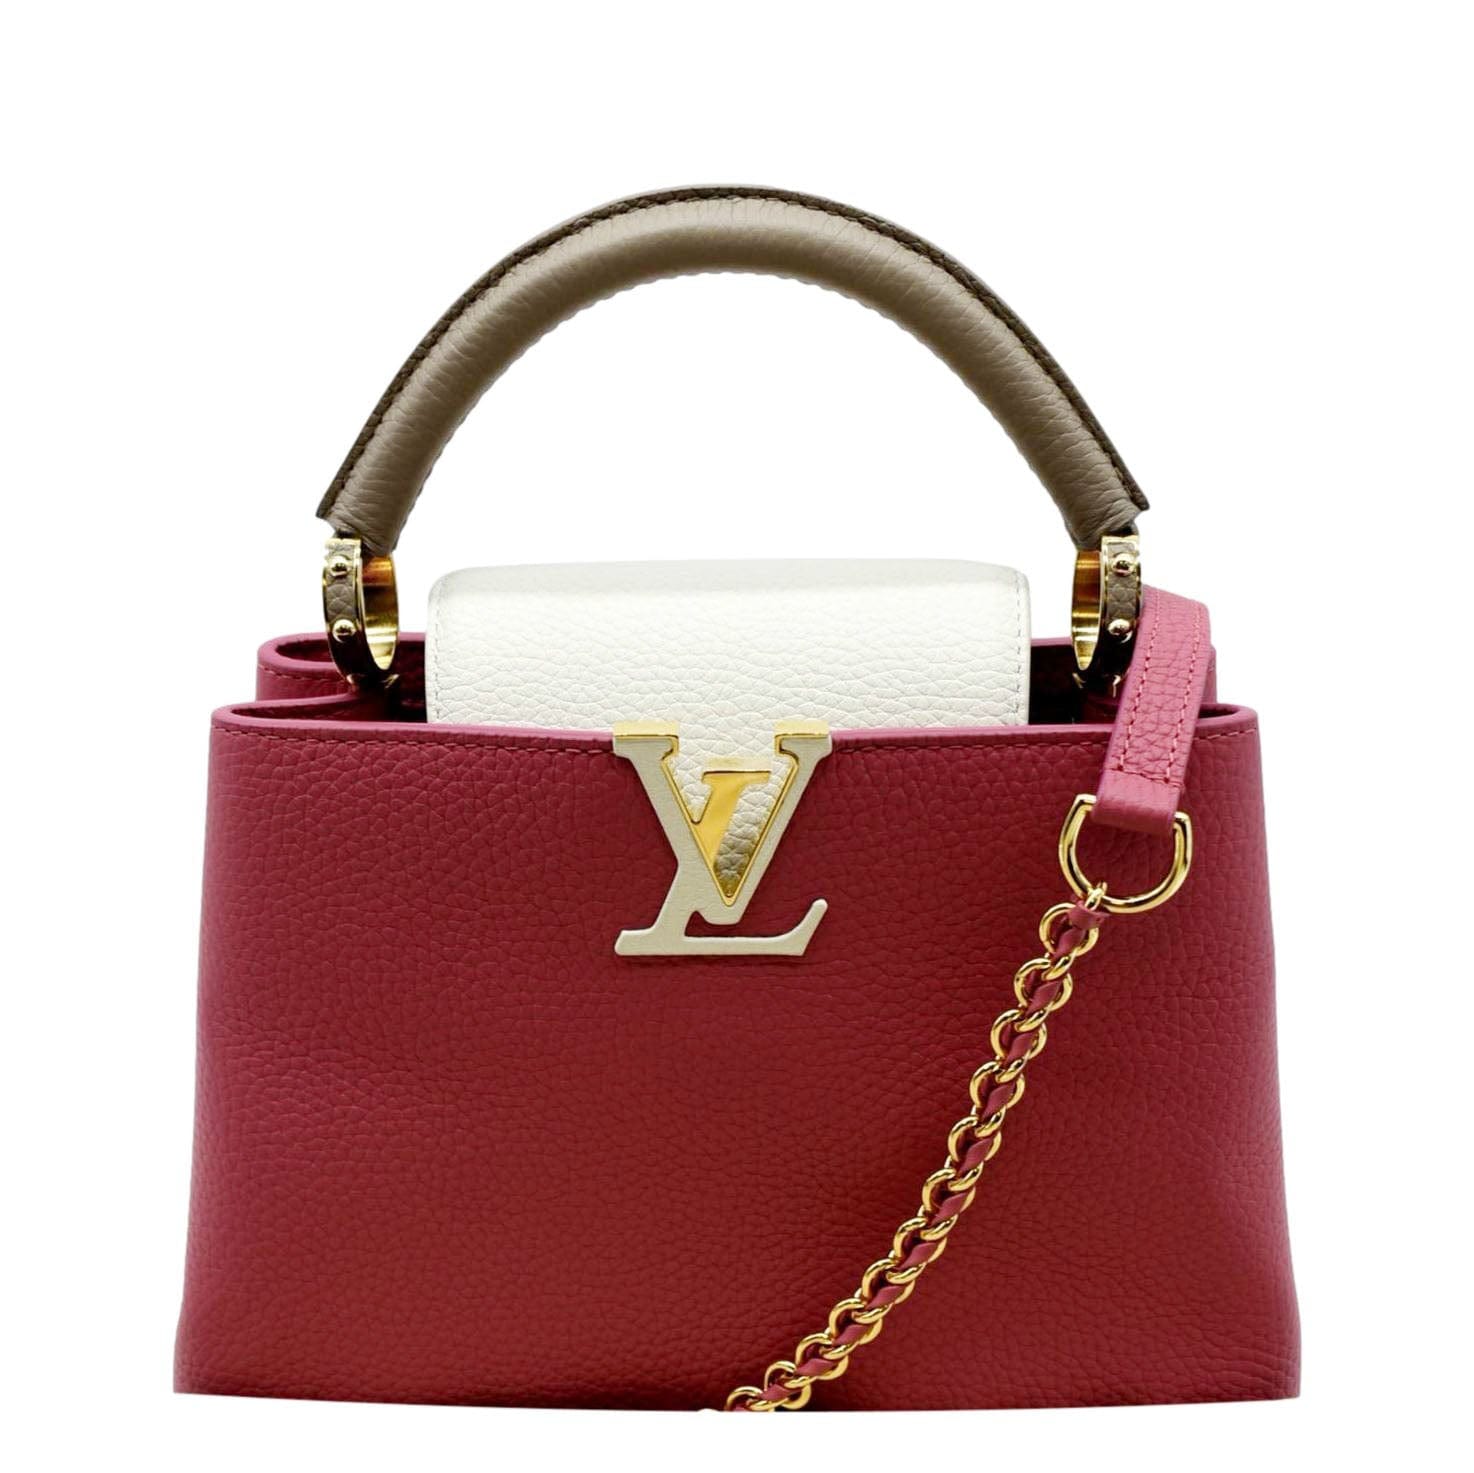 Louis Vuitton Capucines BB Handbag Leather In Black And Red